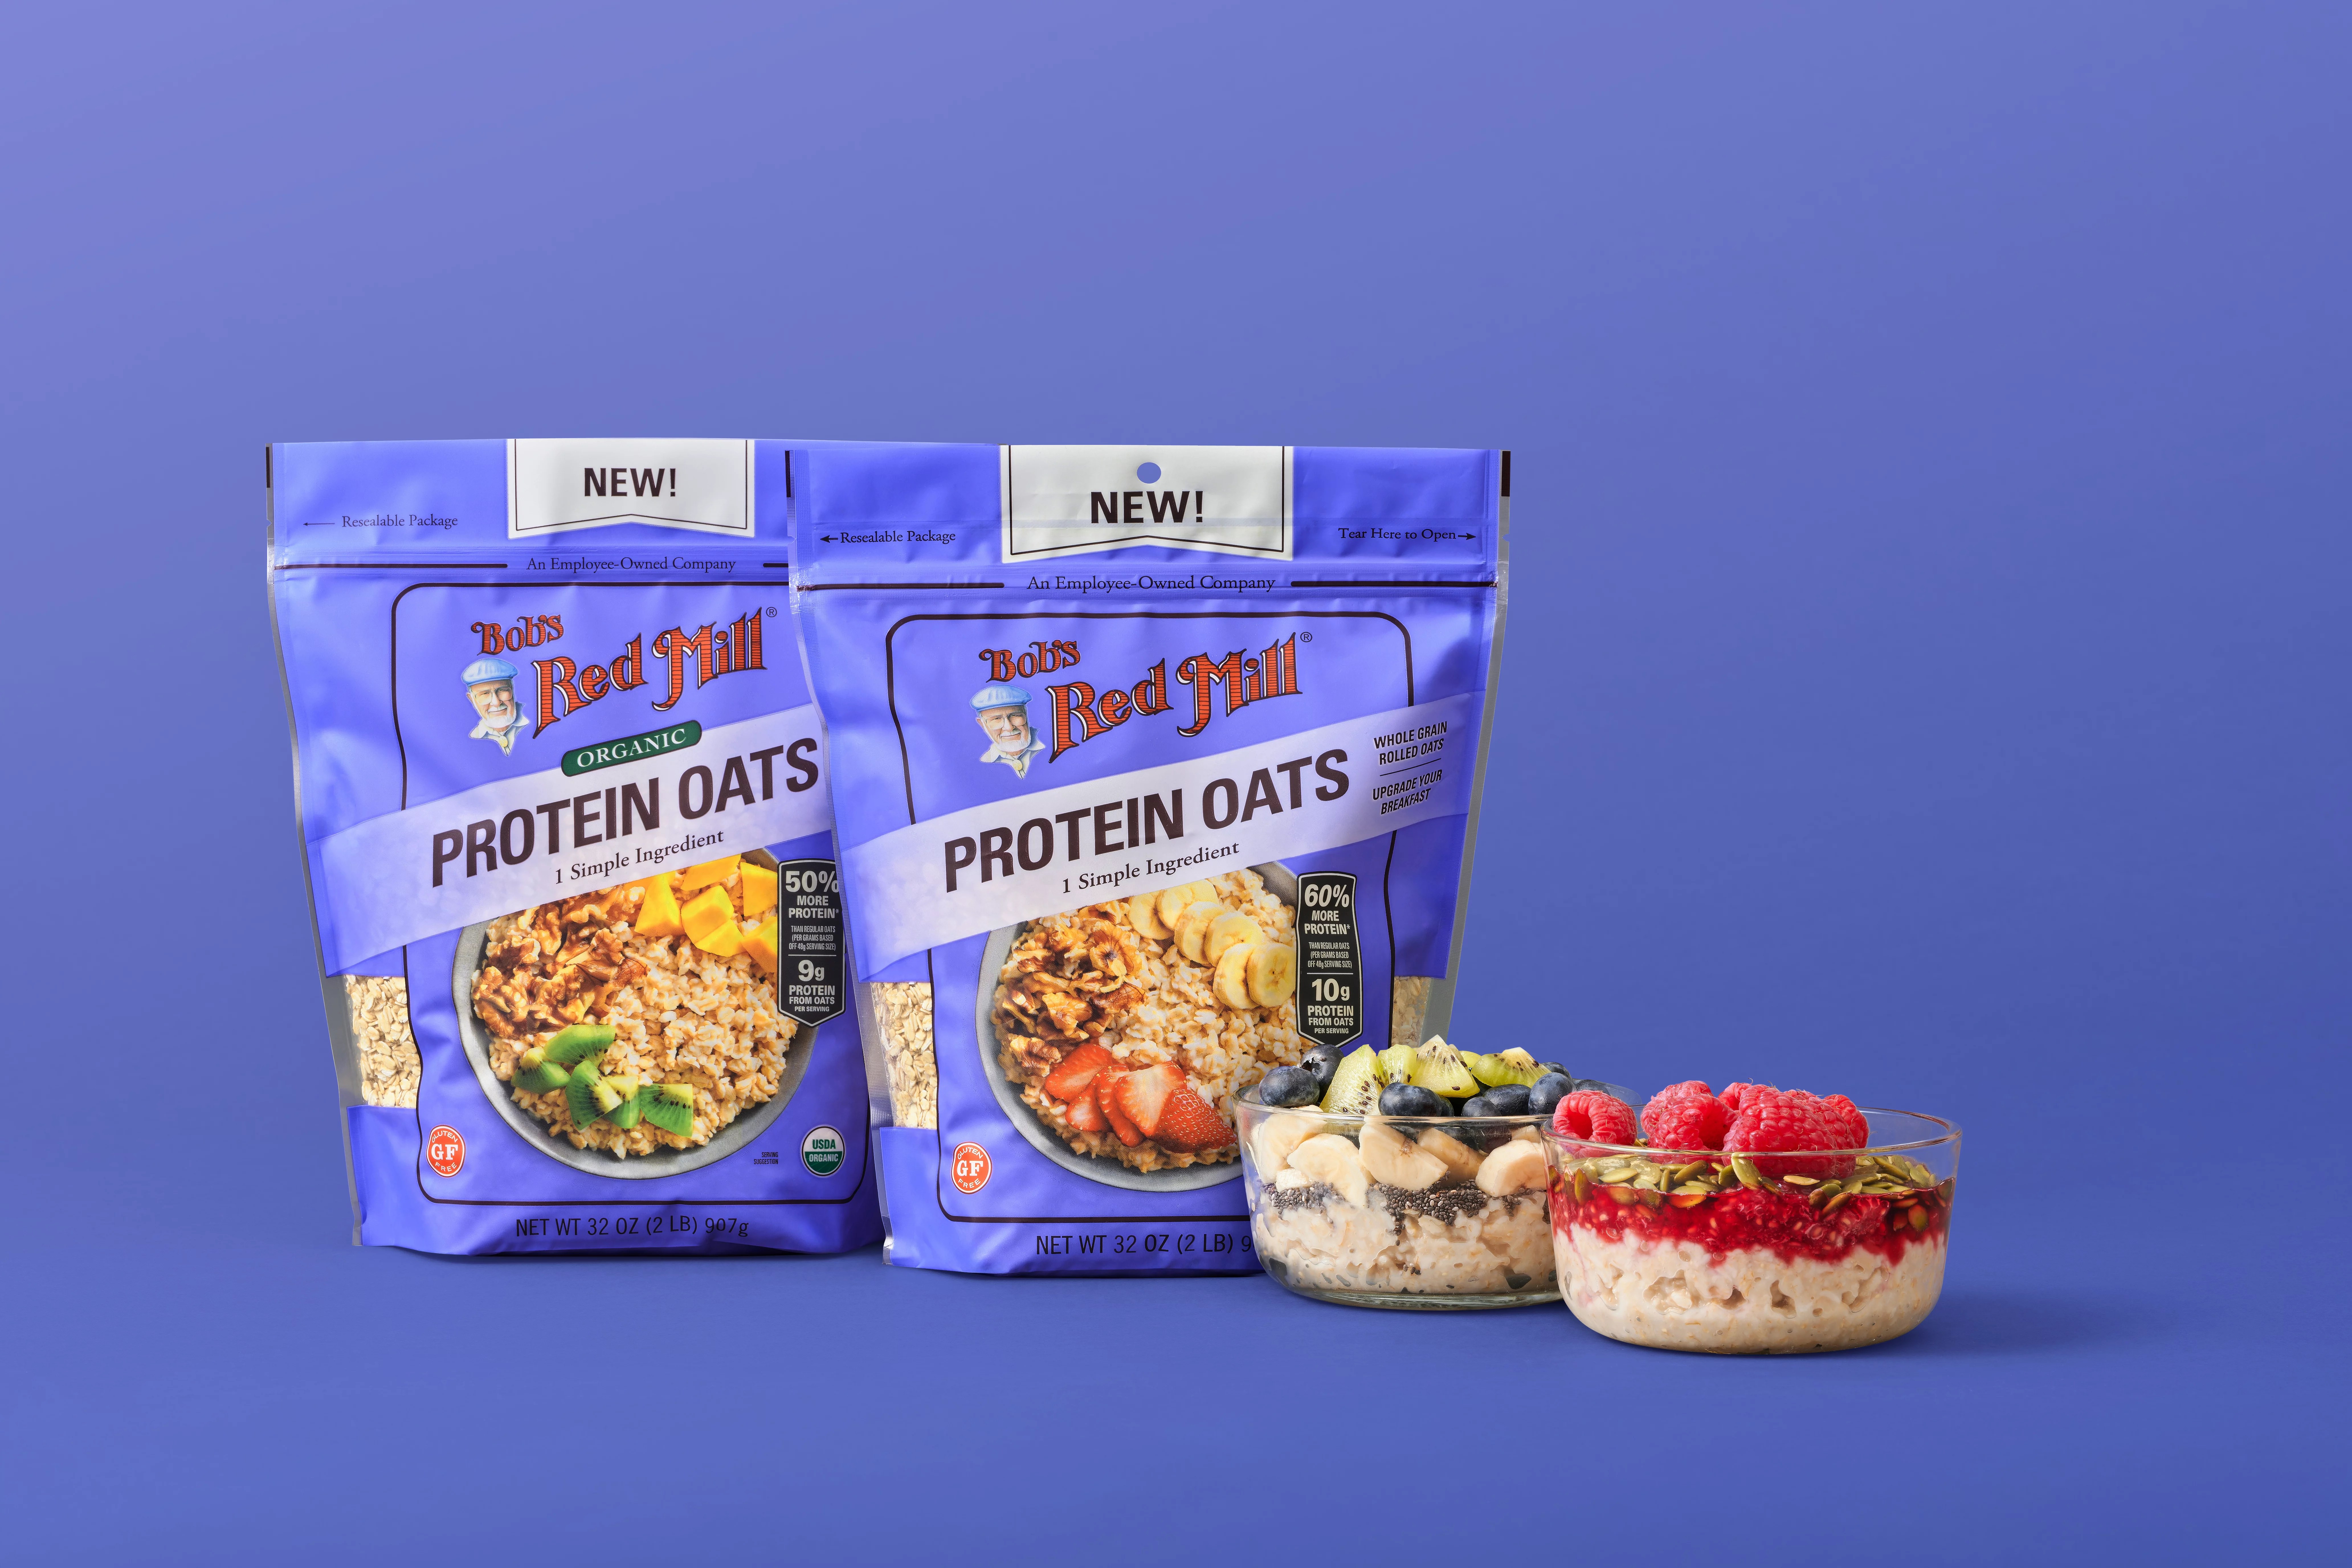 high-protein oats recipes bob's red mills